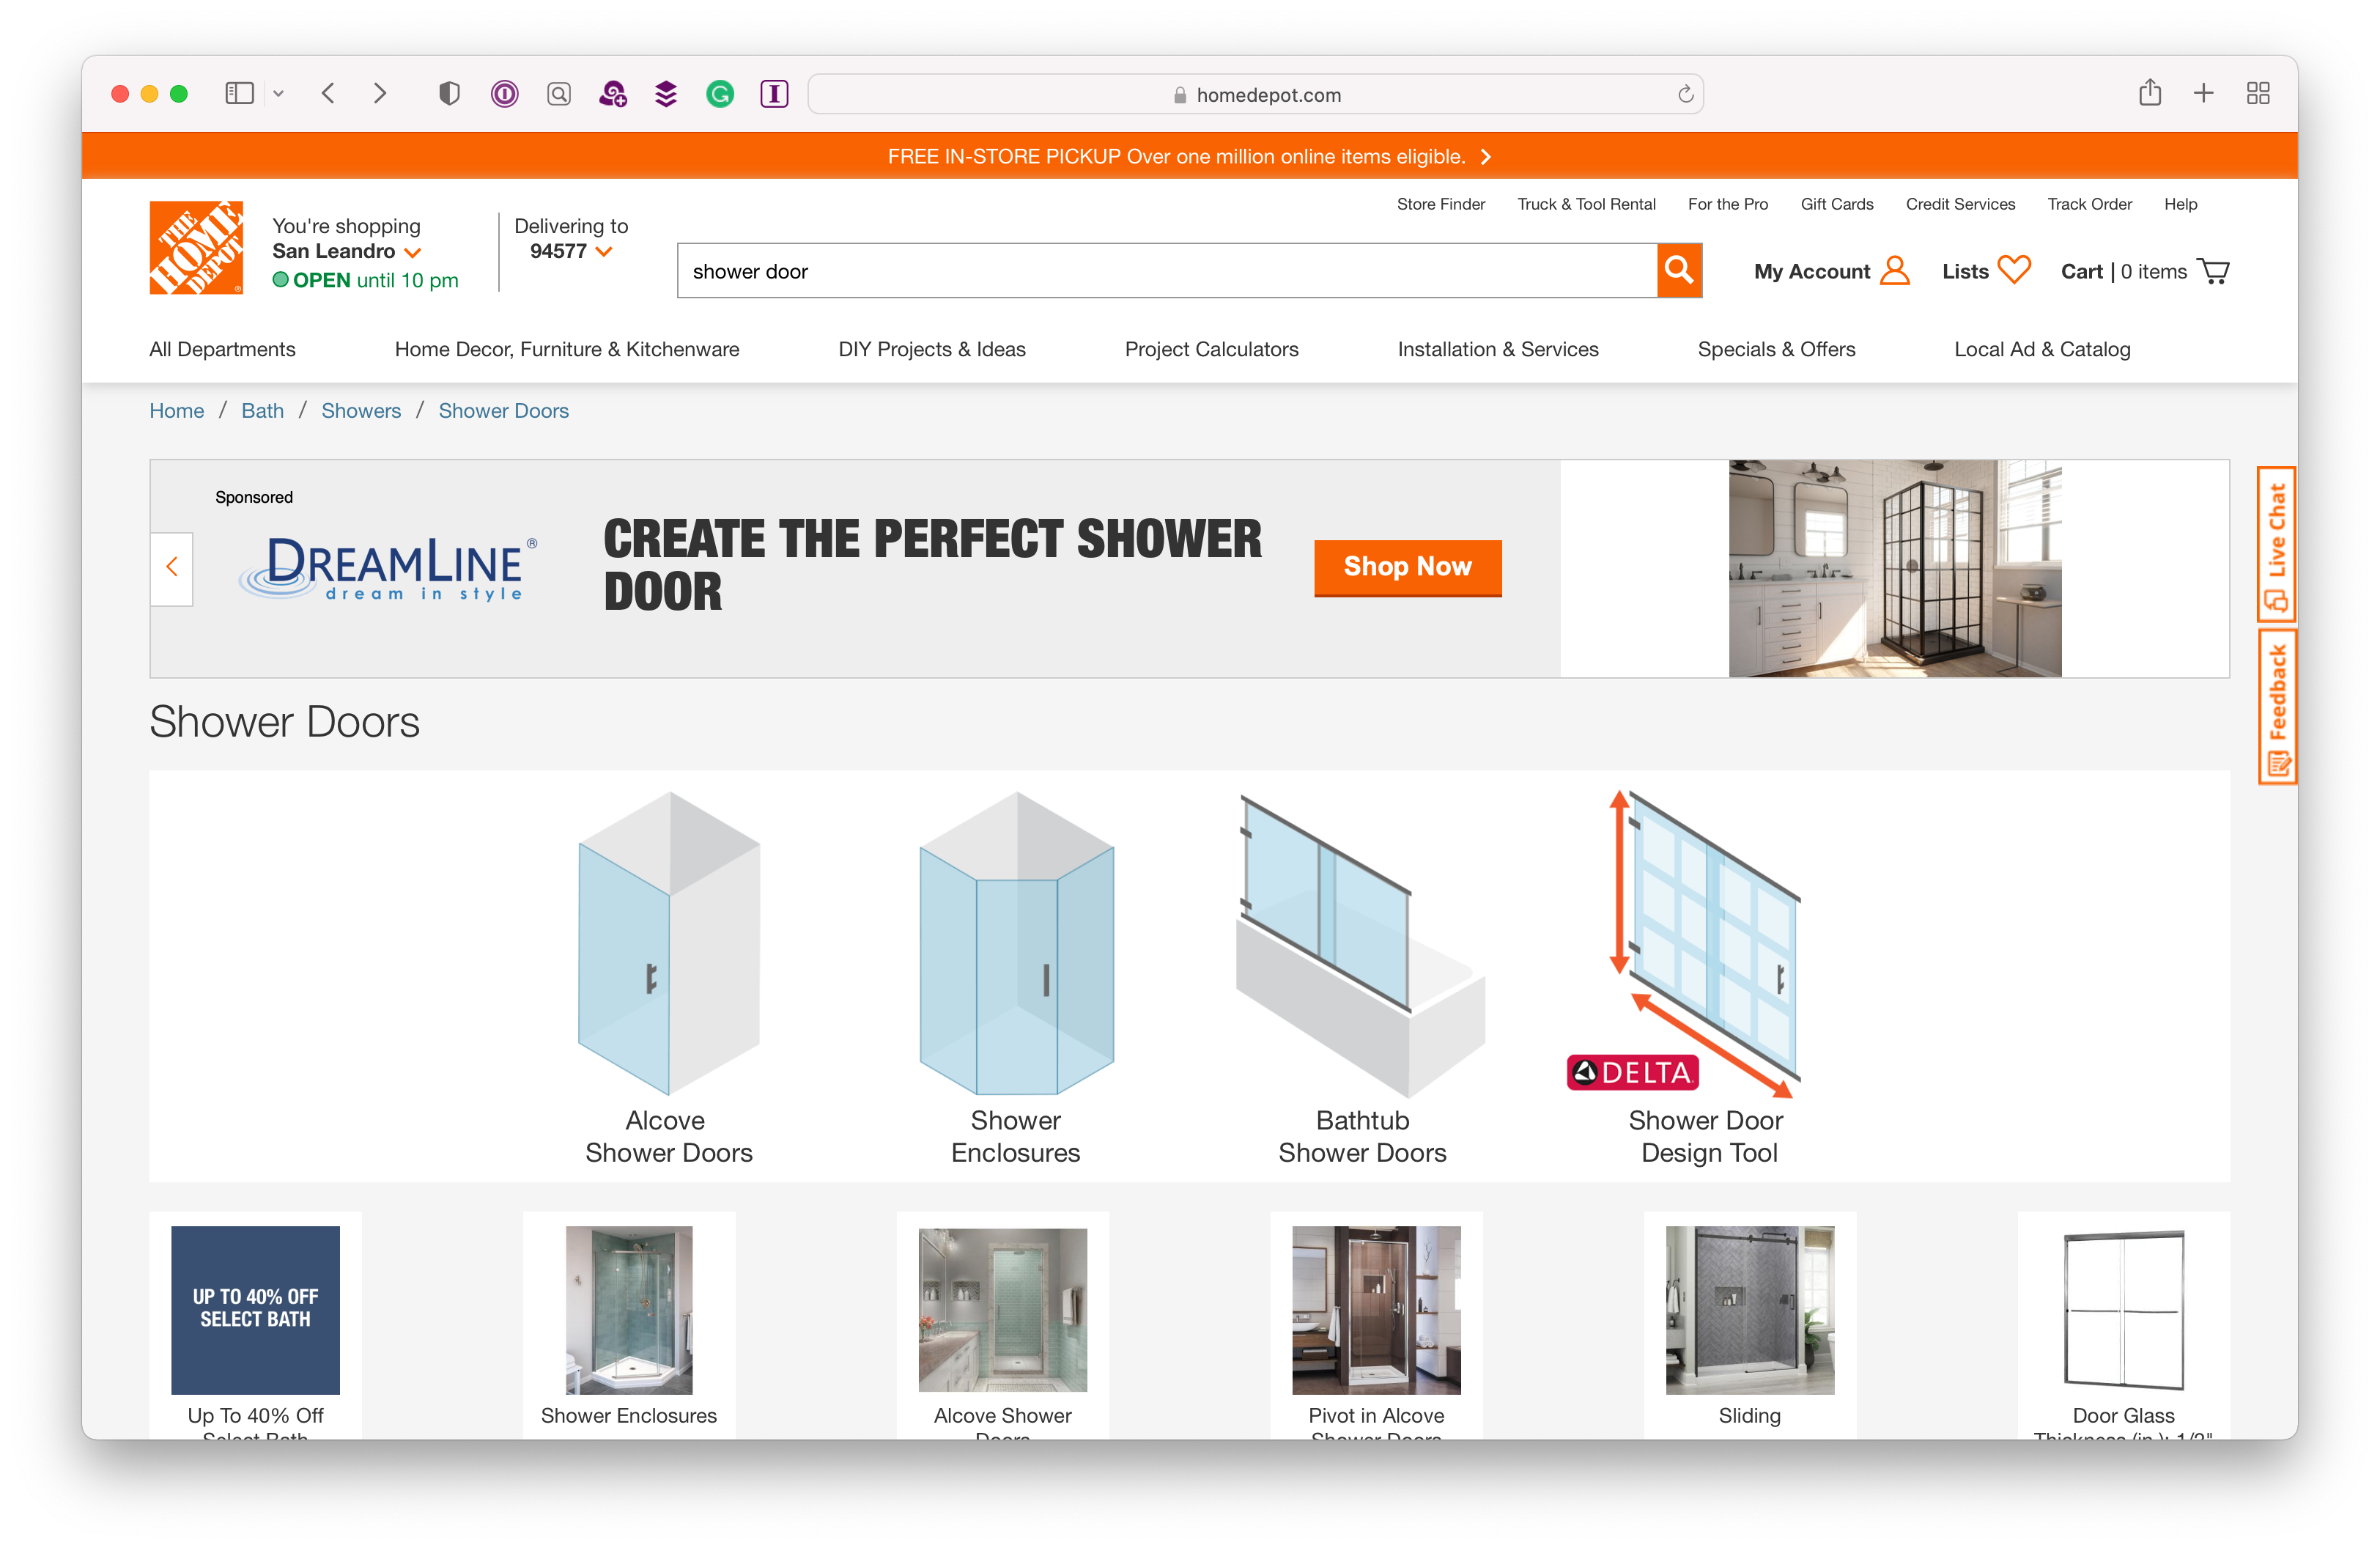 A search results screen on homedepot.com, showing four types of shower doors, illustrated with diagrams.